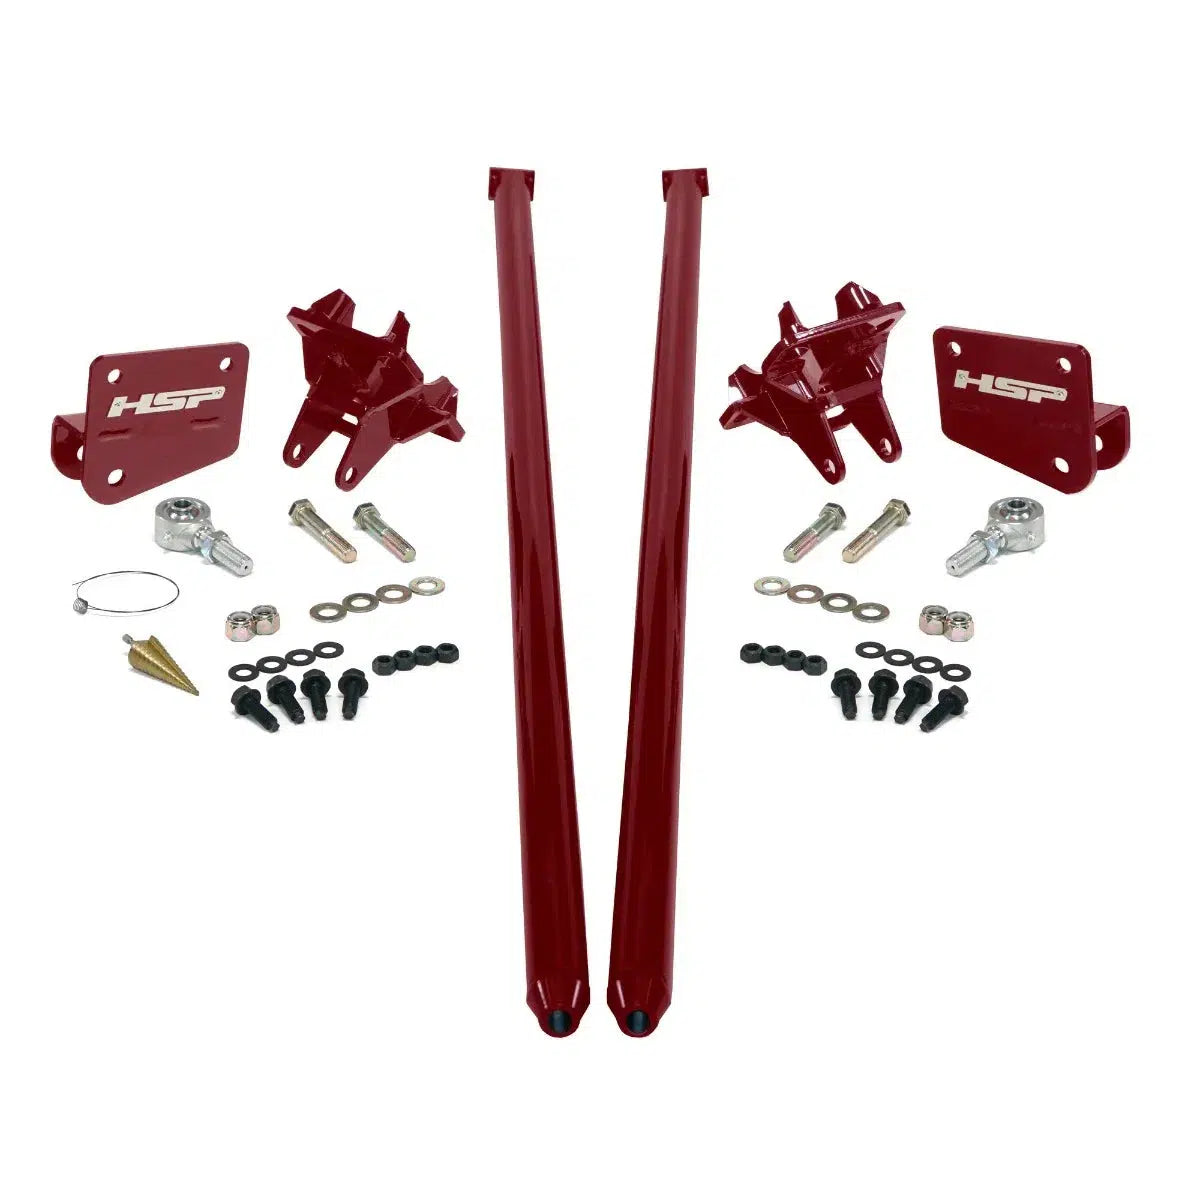 2011-2017 Powerstroke Traction Bars (ECSB) (HSP-P-435-2-2-HSP)-Traction Bars-HSP Diesel-HSP-P-435-2-2-HSP-CR-Dirty Diesel Customs